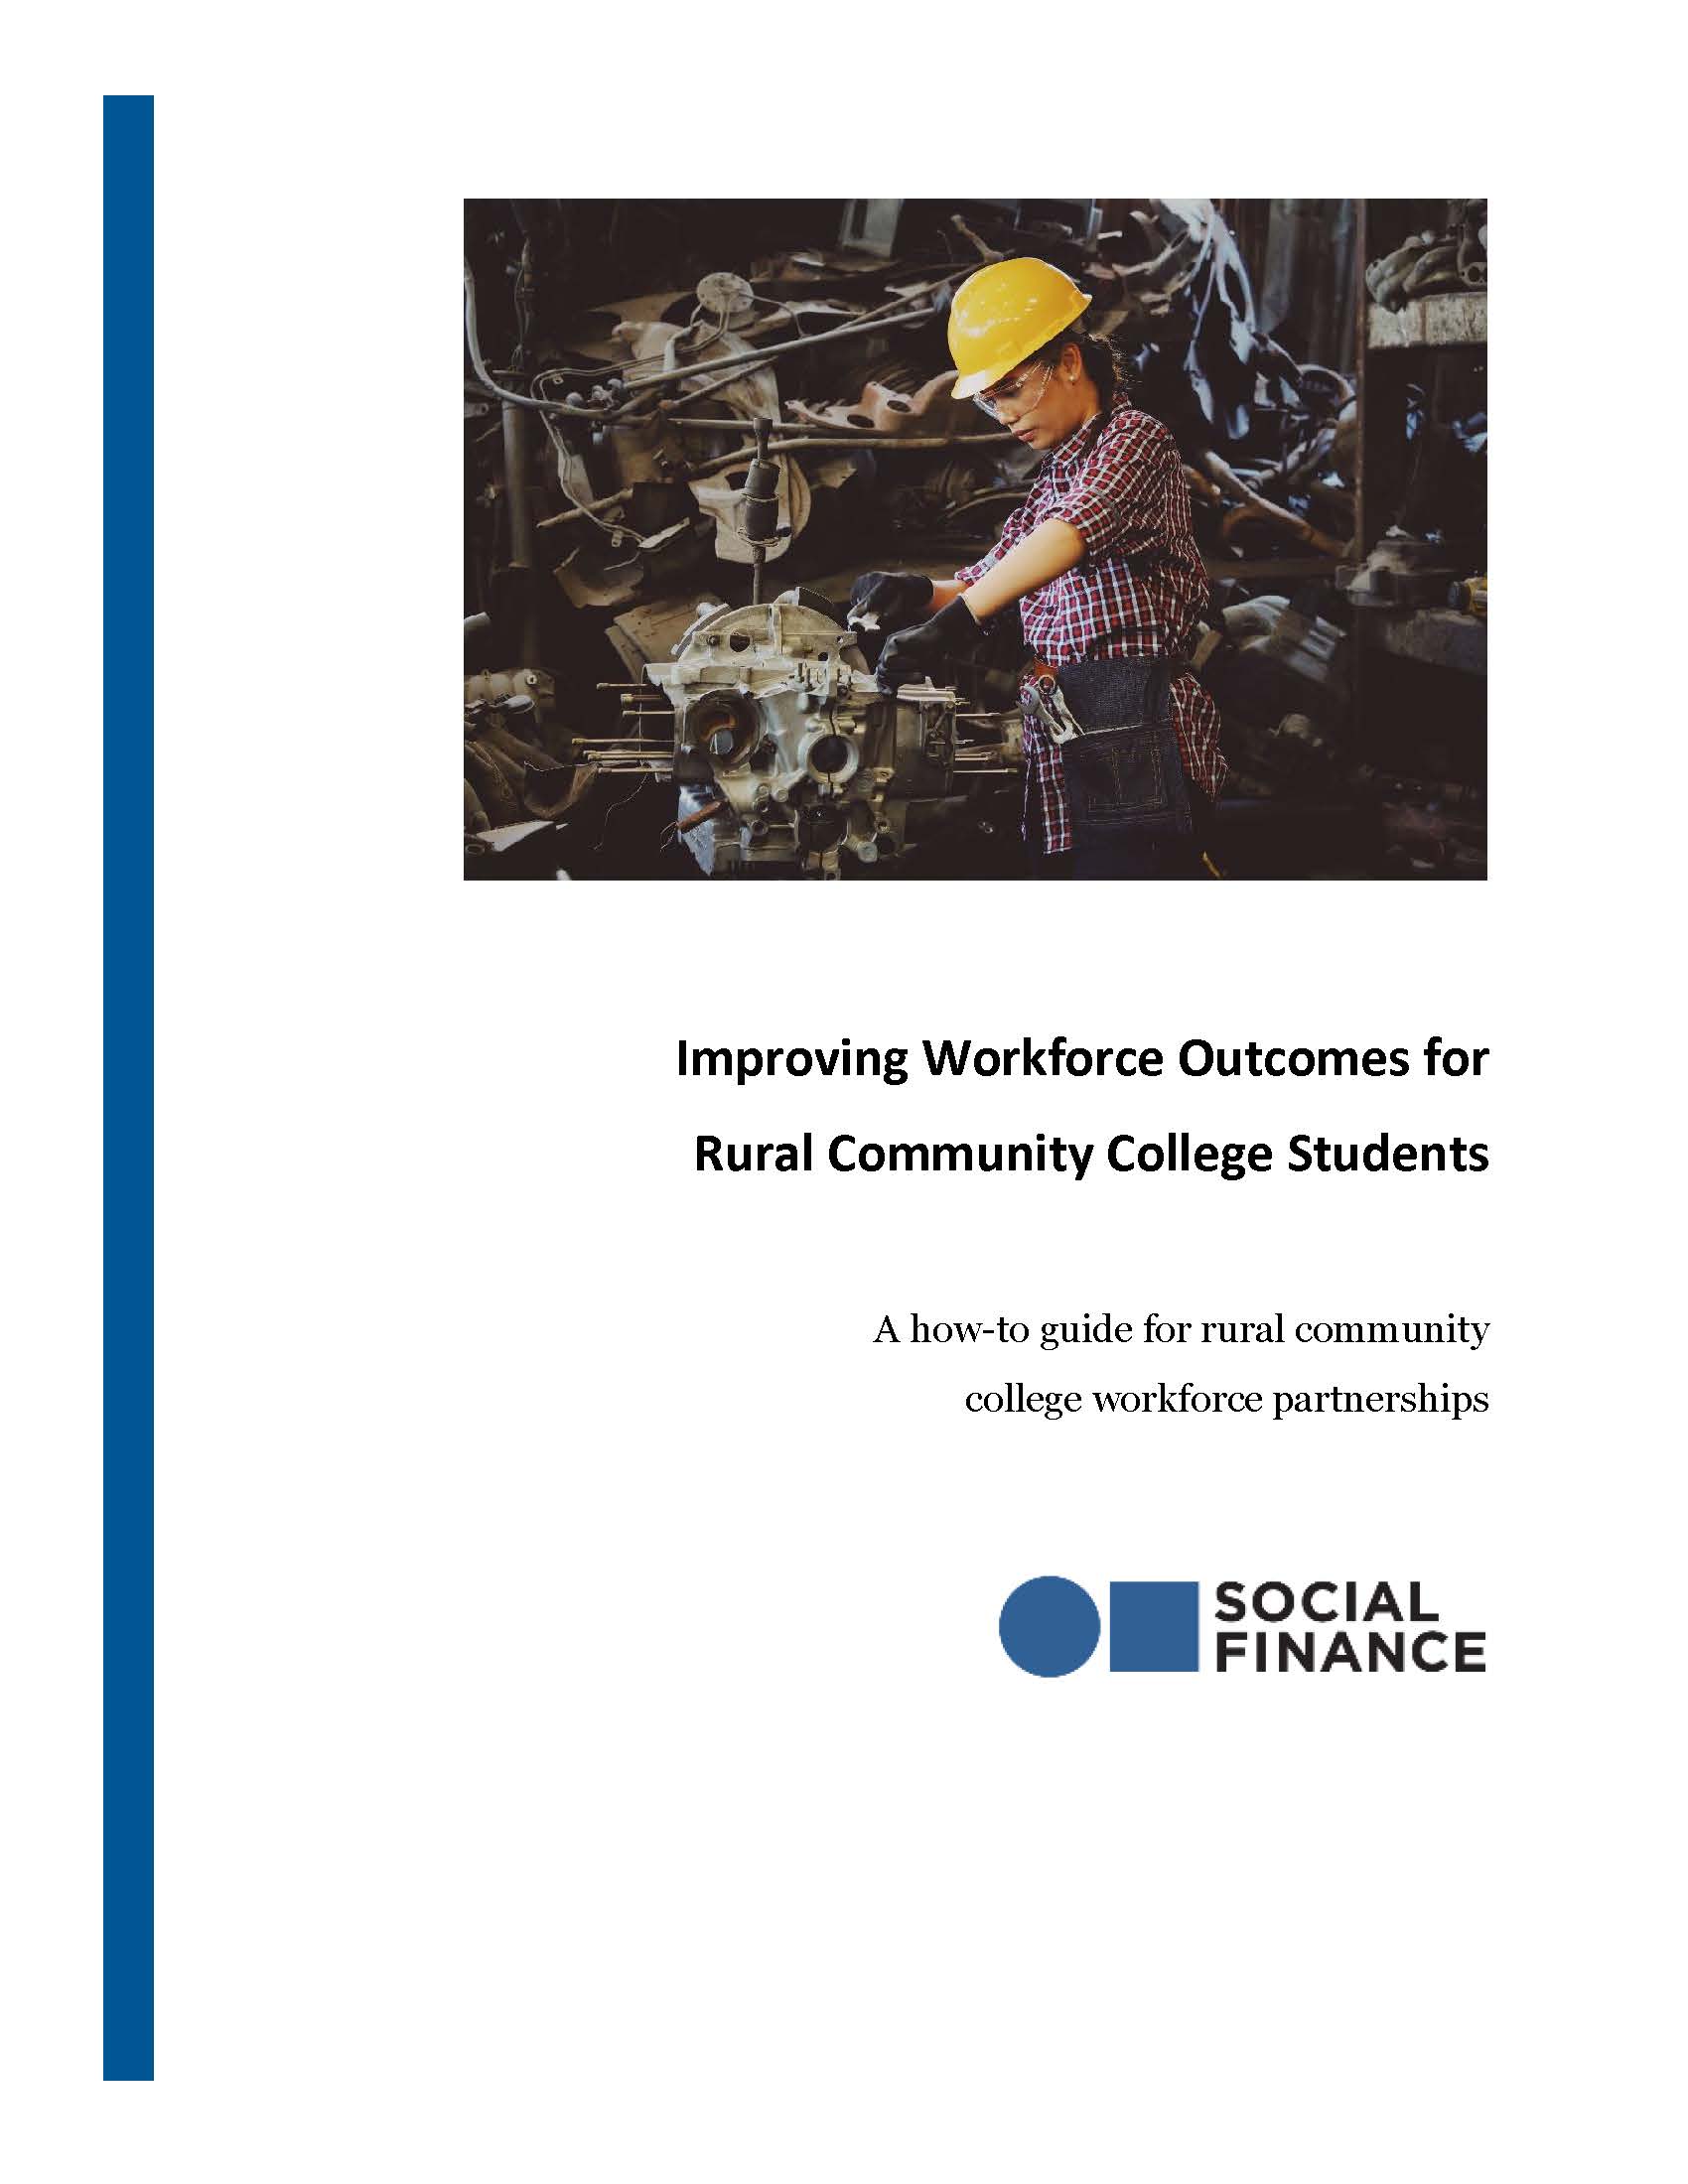 cover of workforce guide